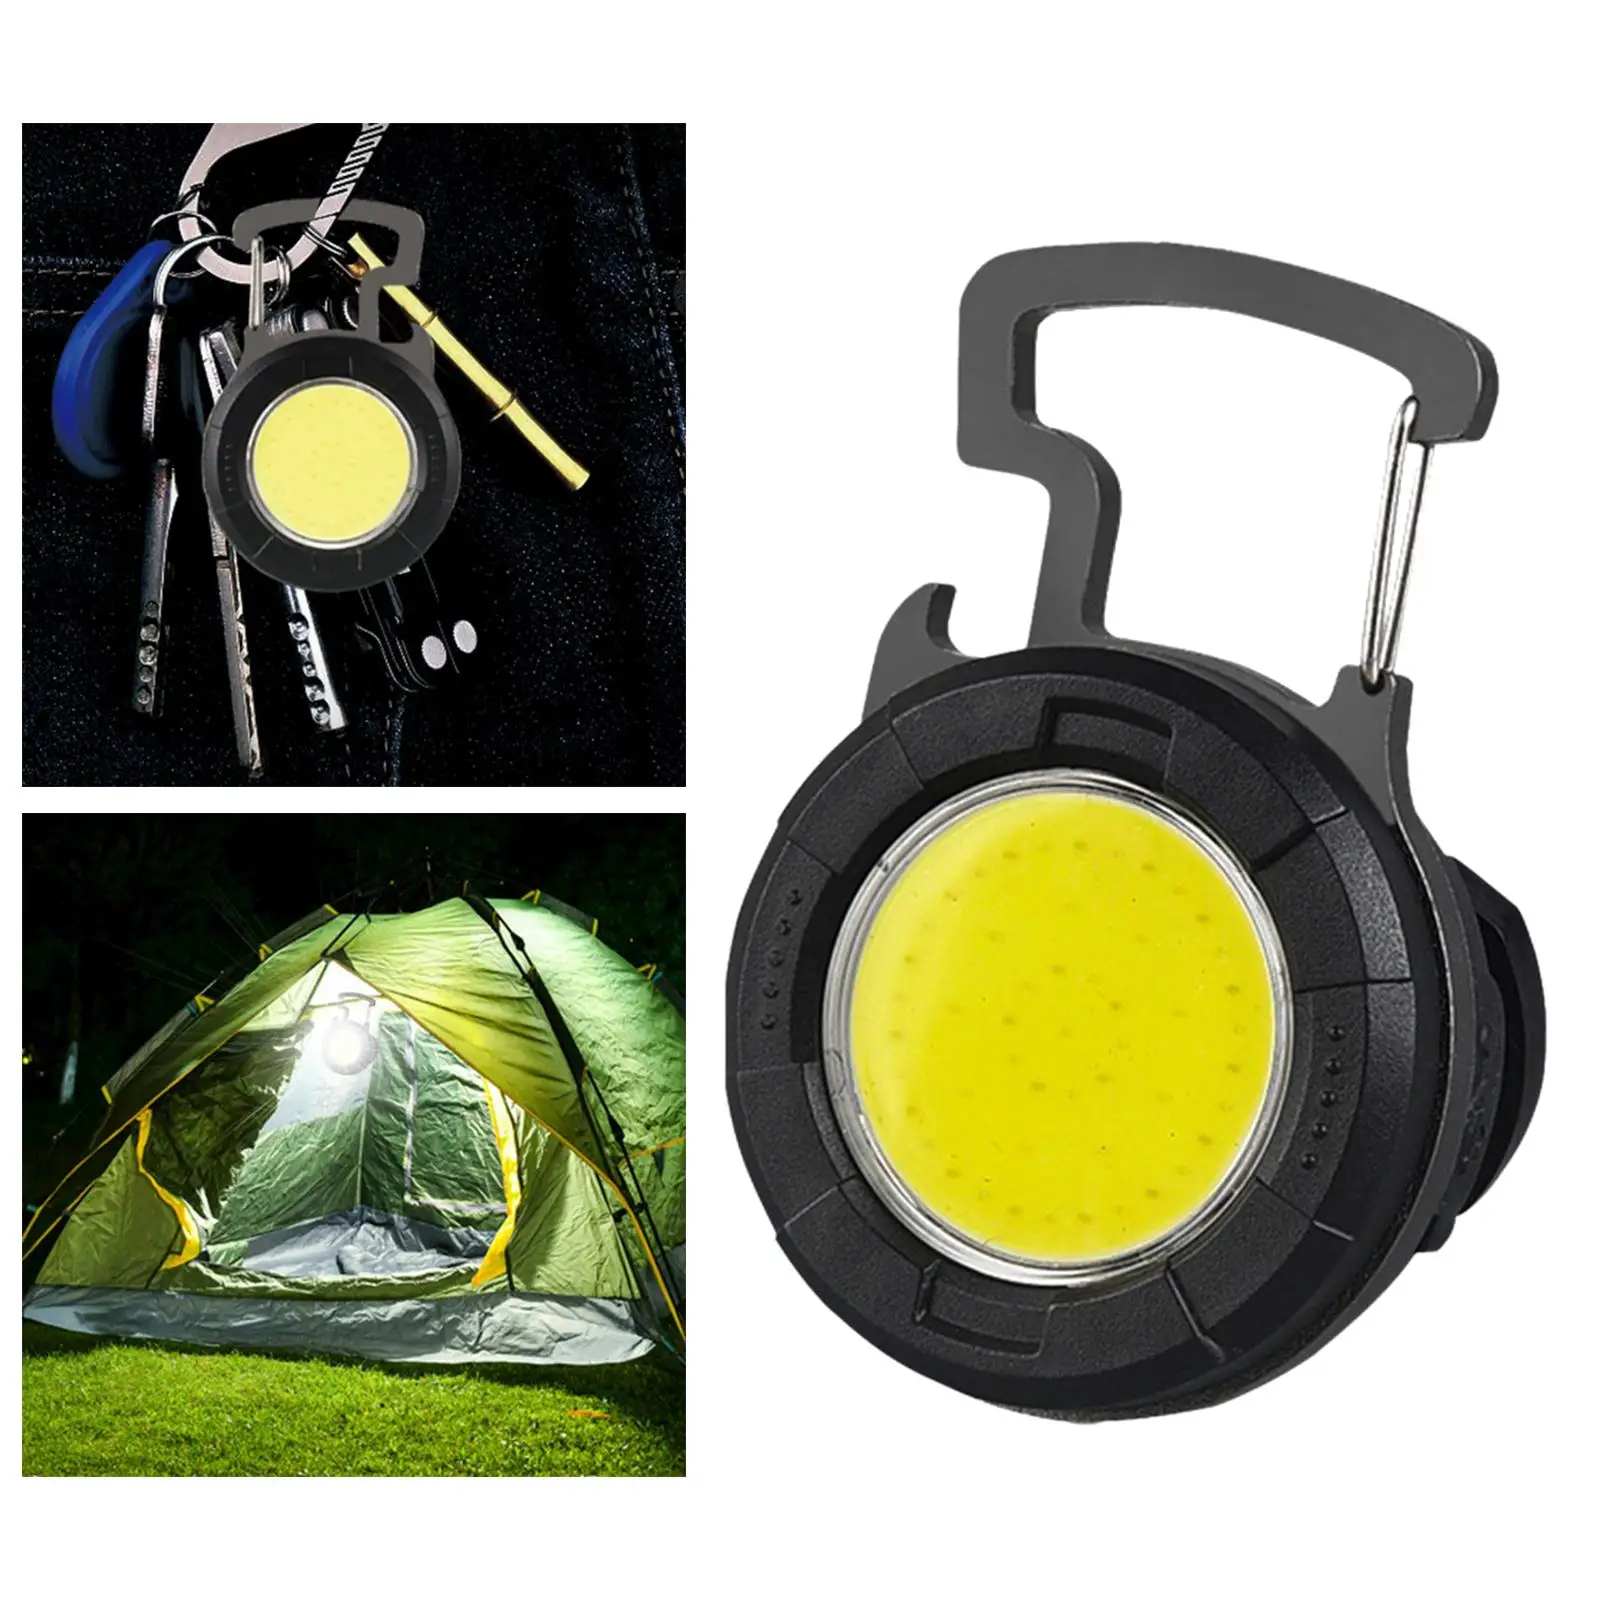 Compact LED Flashlight Rechargeable Keychain COB Bottle Opener Lightweight Hat Clip for Running Emergency Hiking Fishing Outdoor